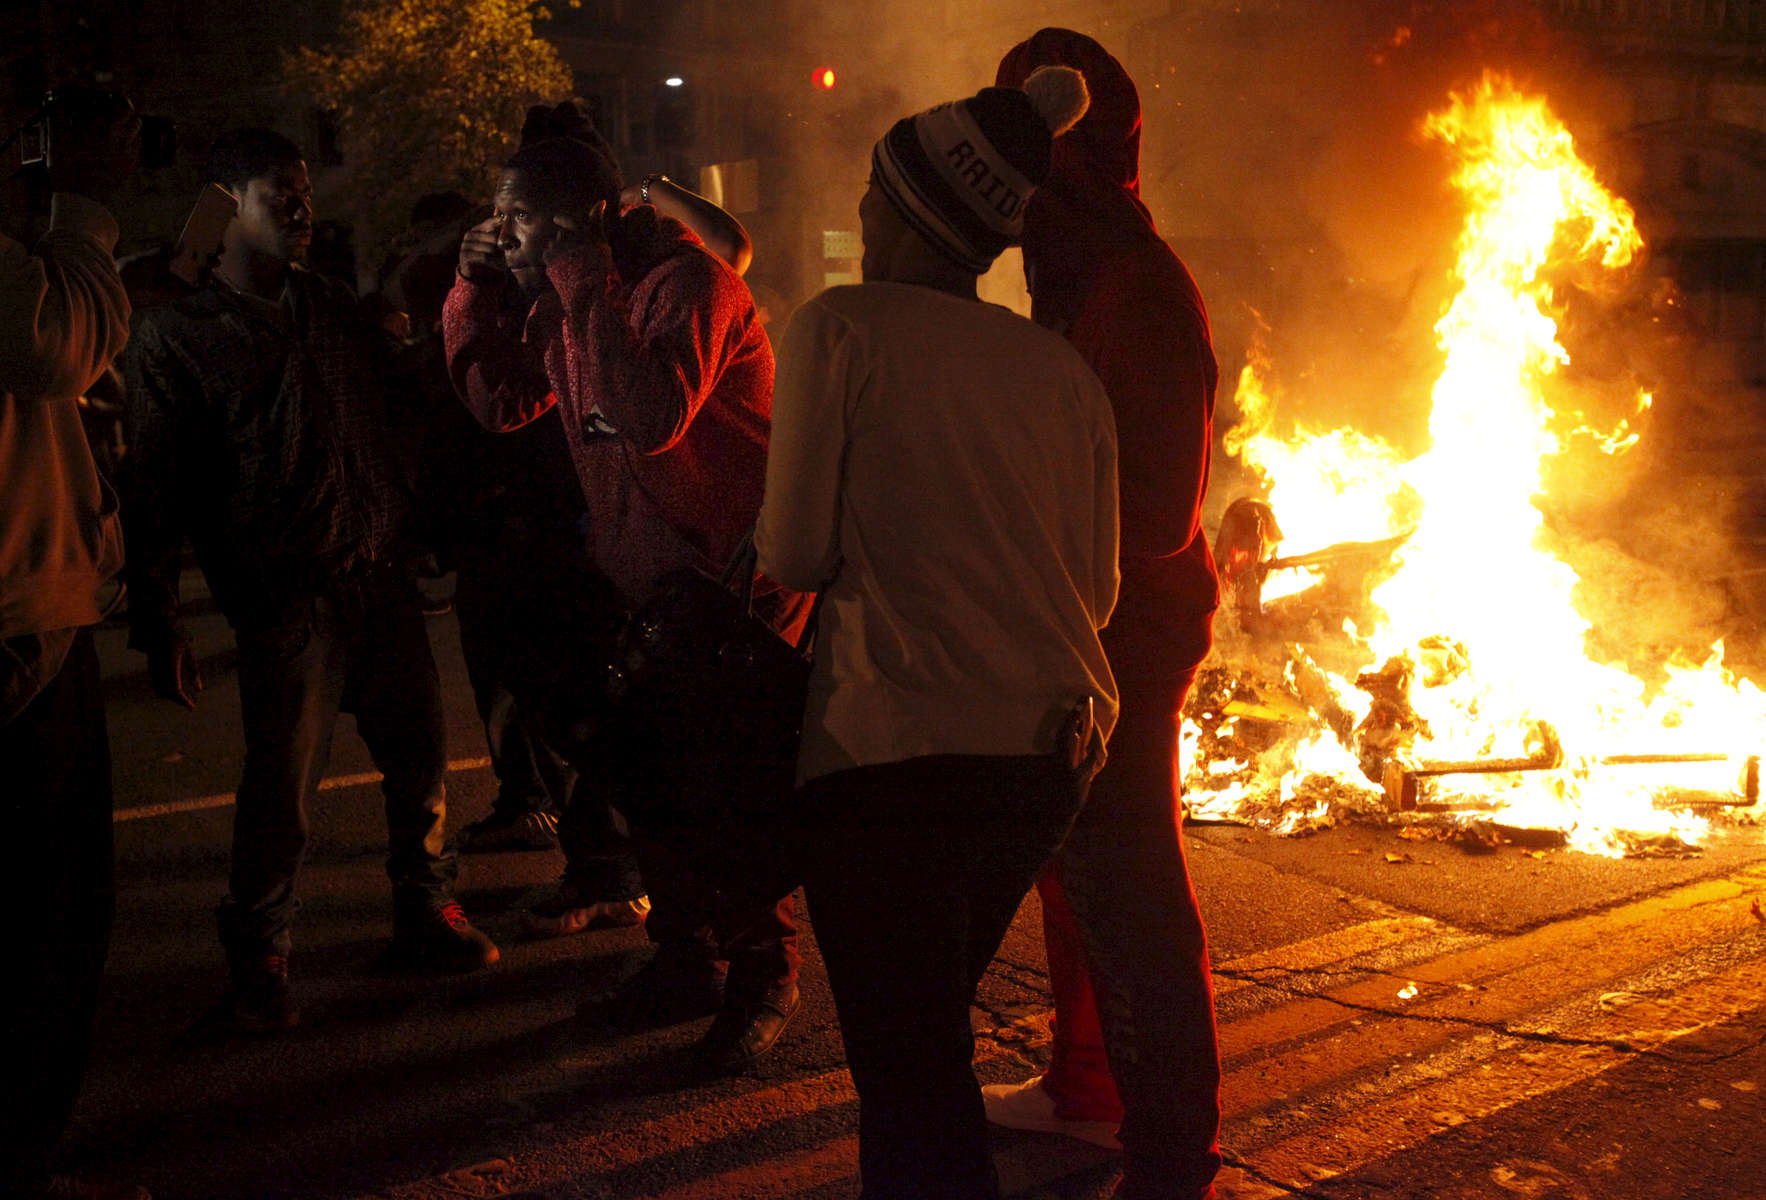 Musical artist Gaitta shoots a music video with others in front of another fire set near Broadway and Telegraph during a protest against the grand jury's decision not to indict the white police officer who fatally shot an unarmed black teenager months ago in Ferguson Nov. 24, 2014 in Oakland, Calif.